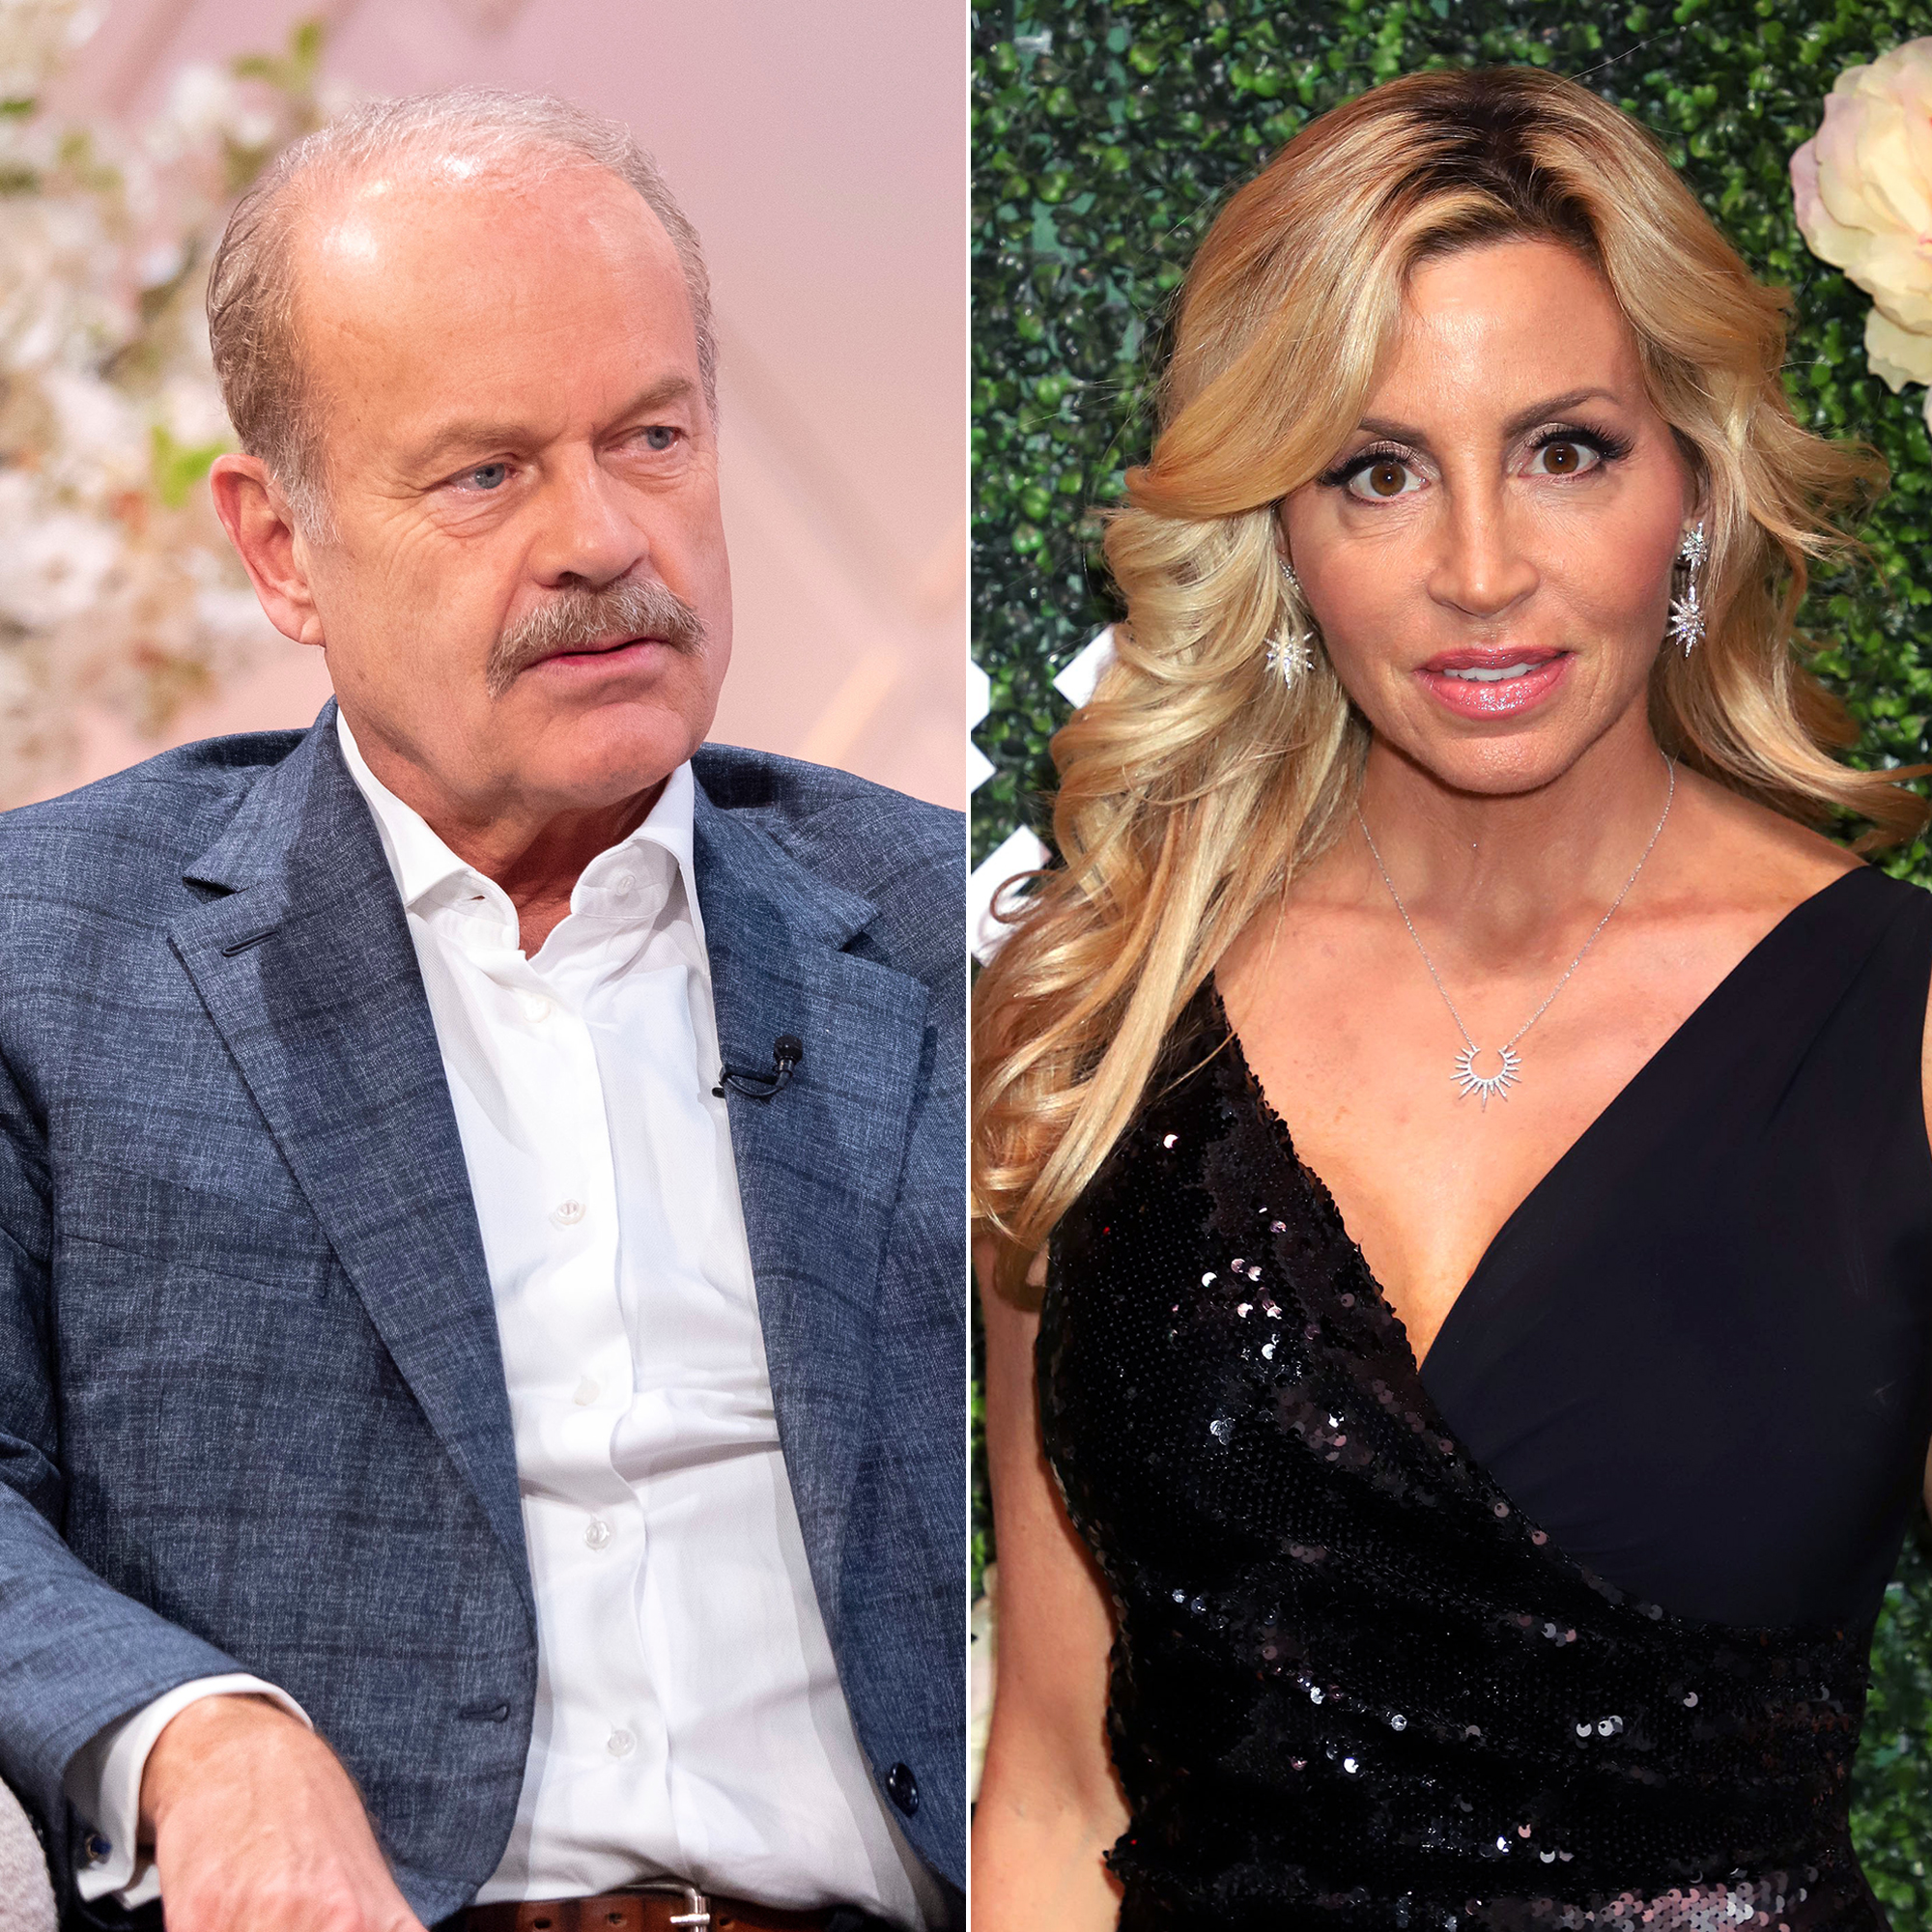 Kelsey Grammer Slams Pathetic Ex-Wife Camille Grammer pic pic